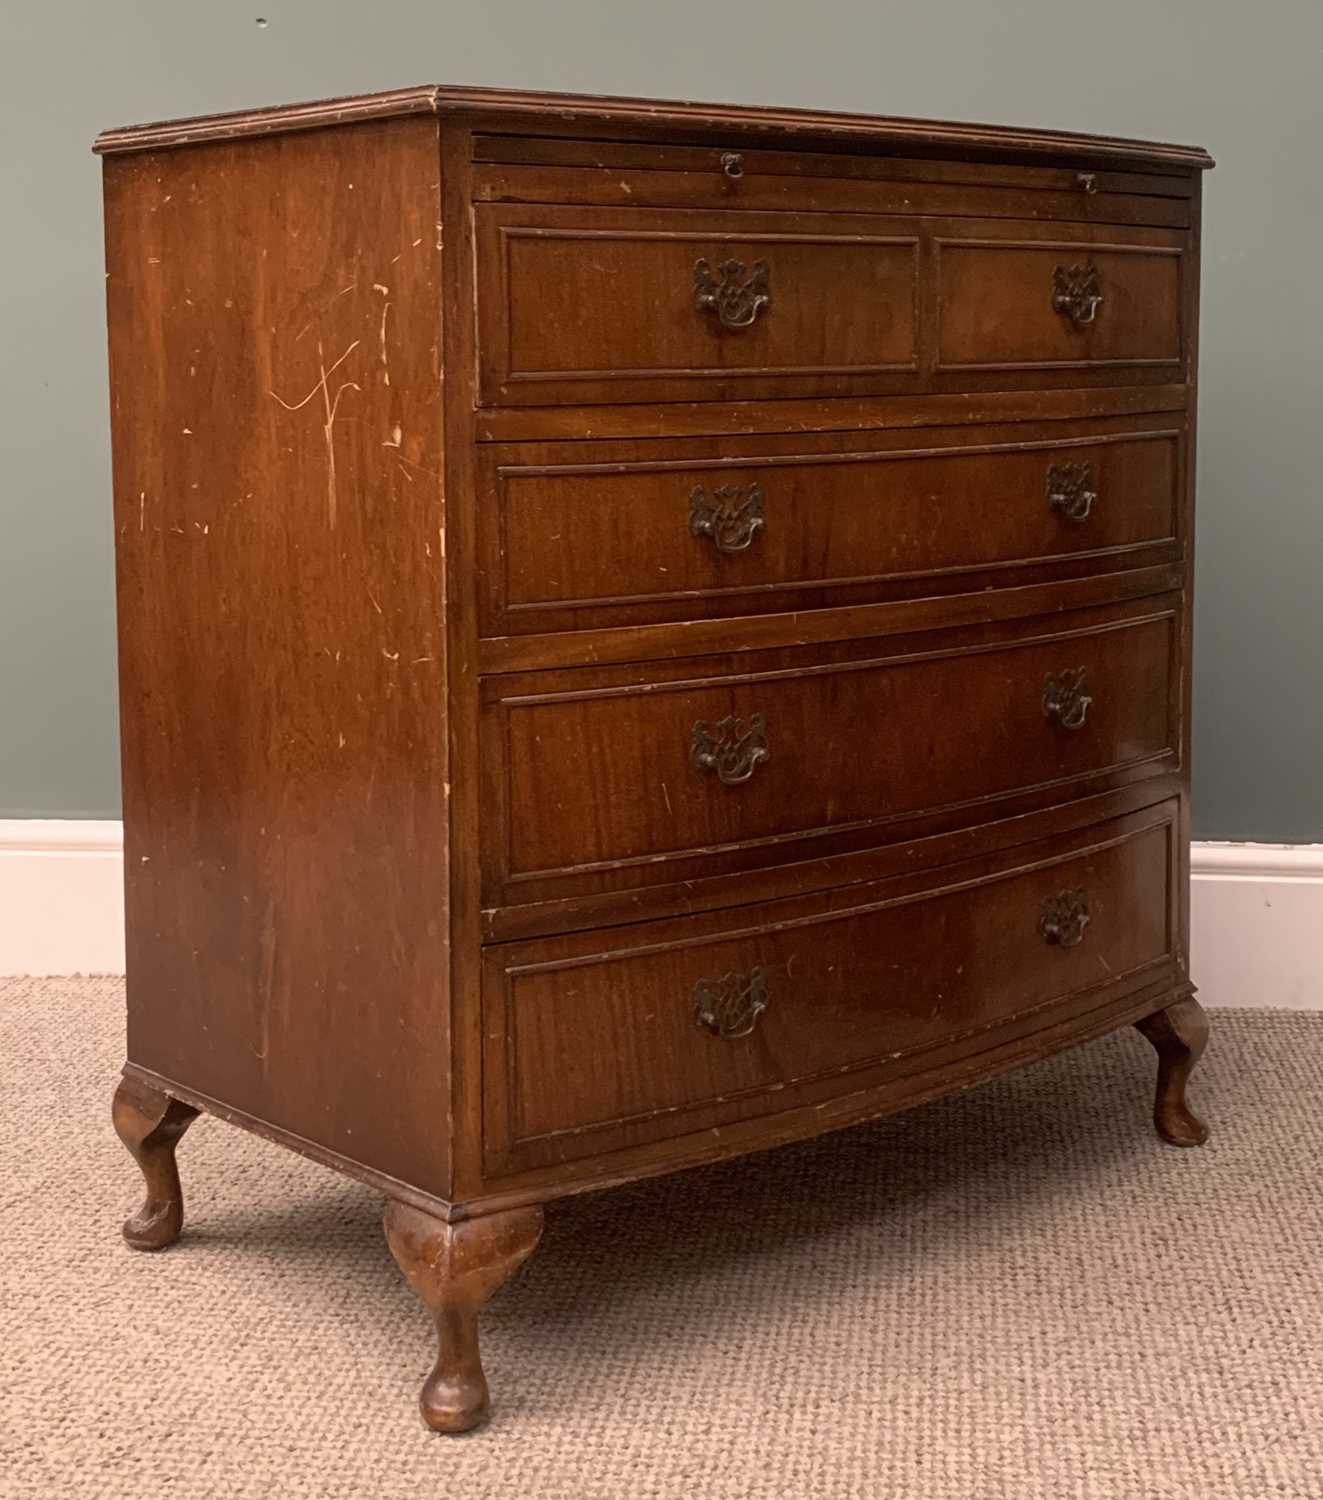 REPRODUCTION MAHOGANY BOW FRONT FOUR DRAWER CHEST, with brush slider, 83 (h) x 77 (w) x 45cms (d) - Image 3 of 5